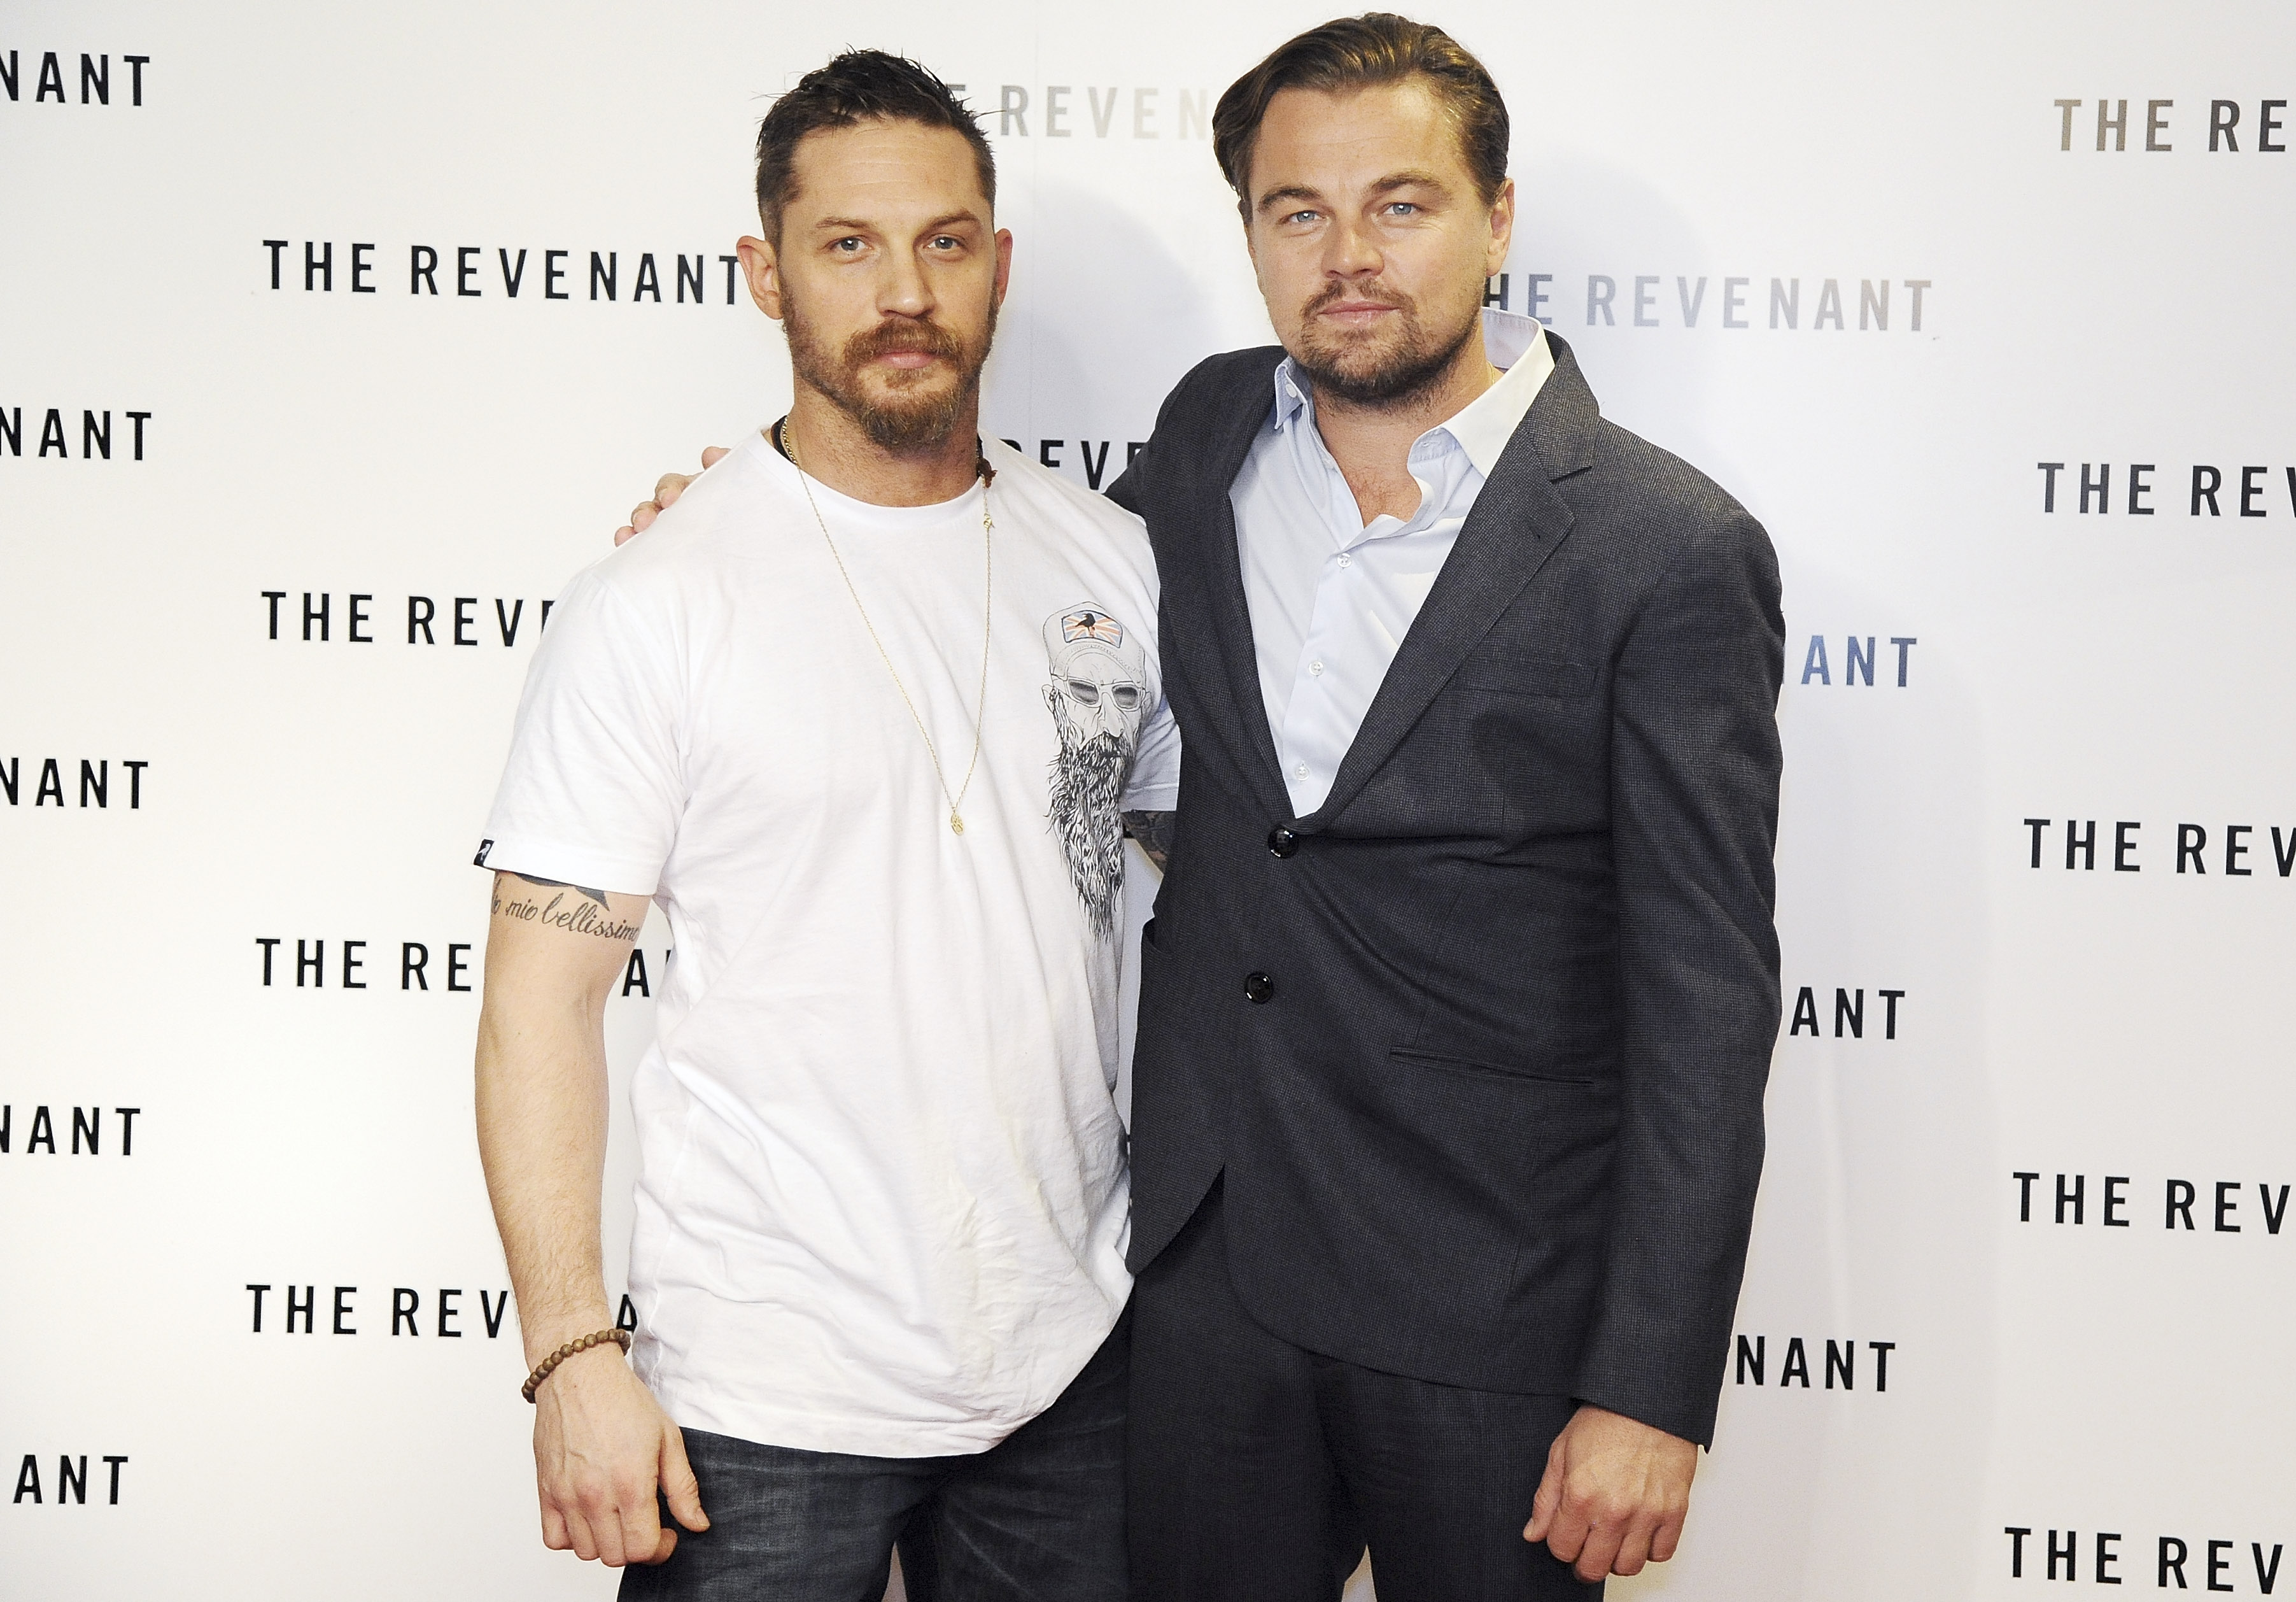 Tom Hardy And Leonardo Dicaprio Attend Special Bafta Screening And Qanda Session For The Revenant 